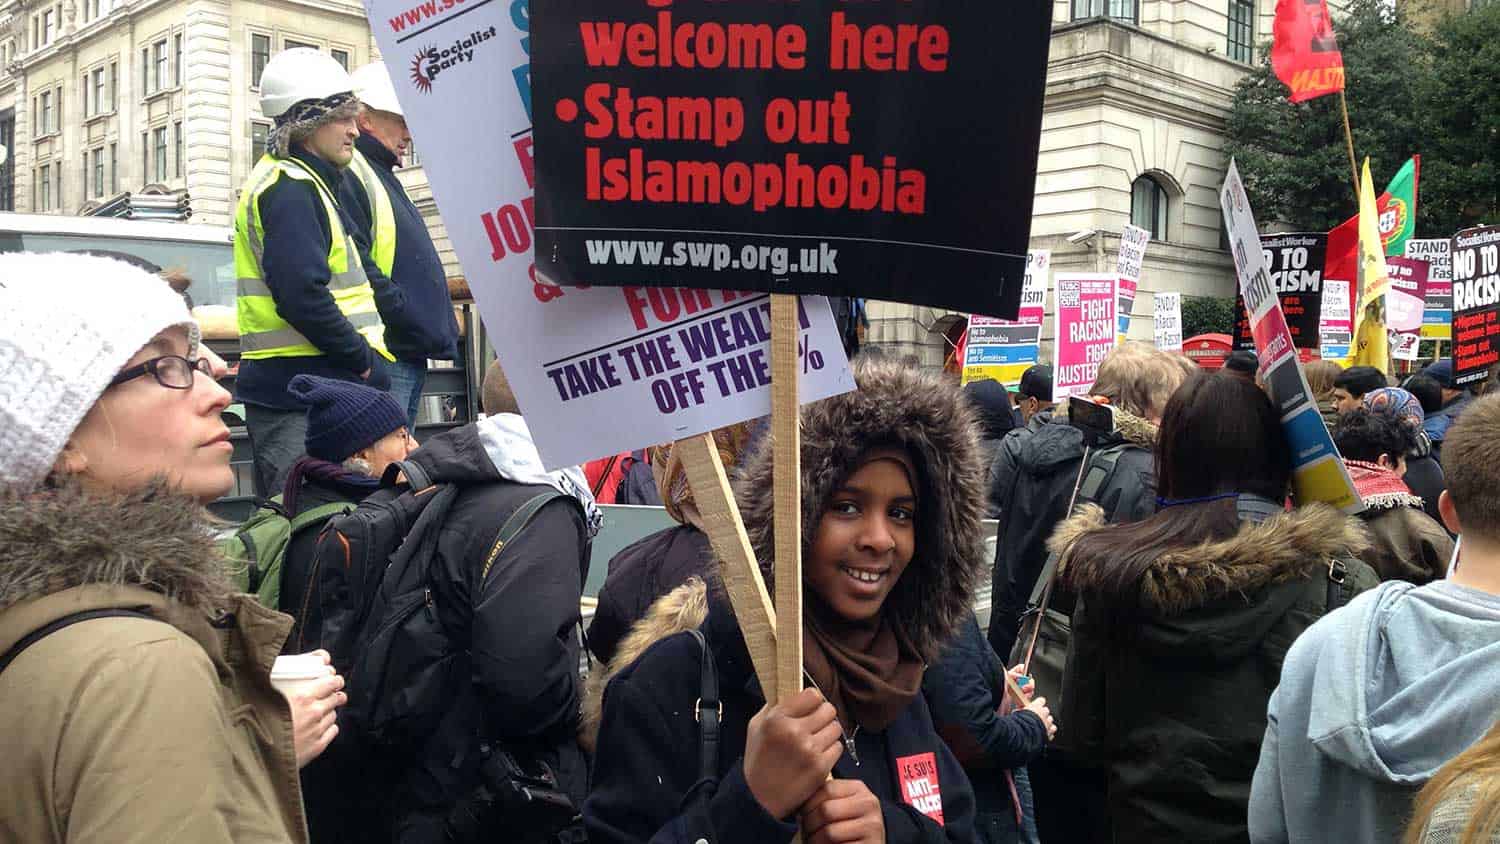 Young man holding a stamp out islamophobia sign at a protest